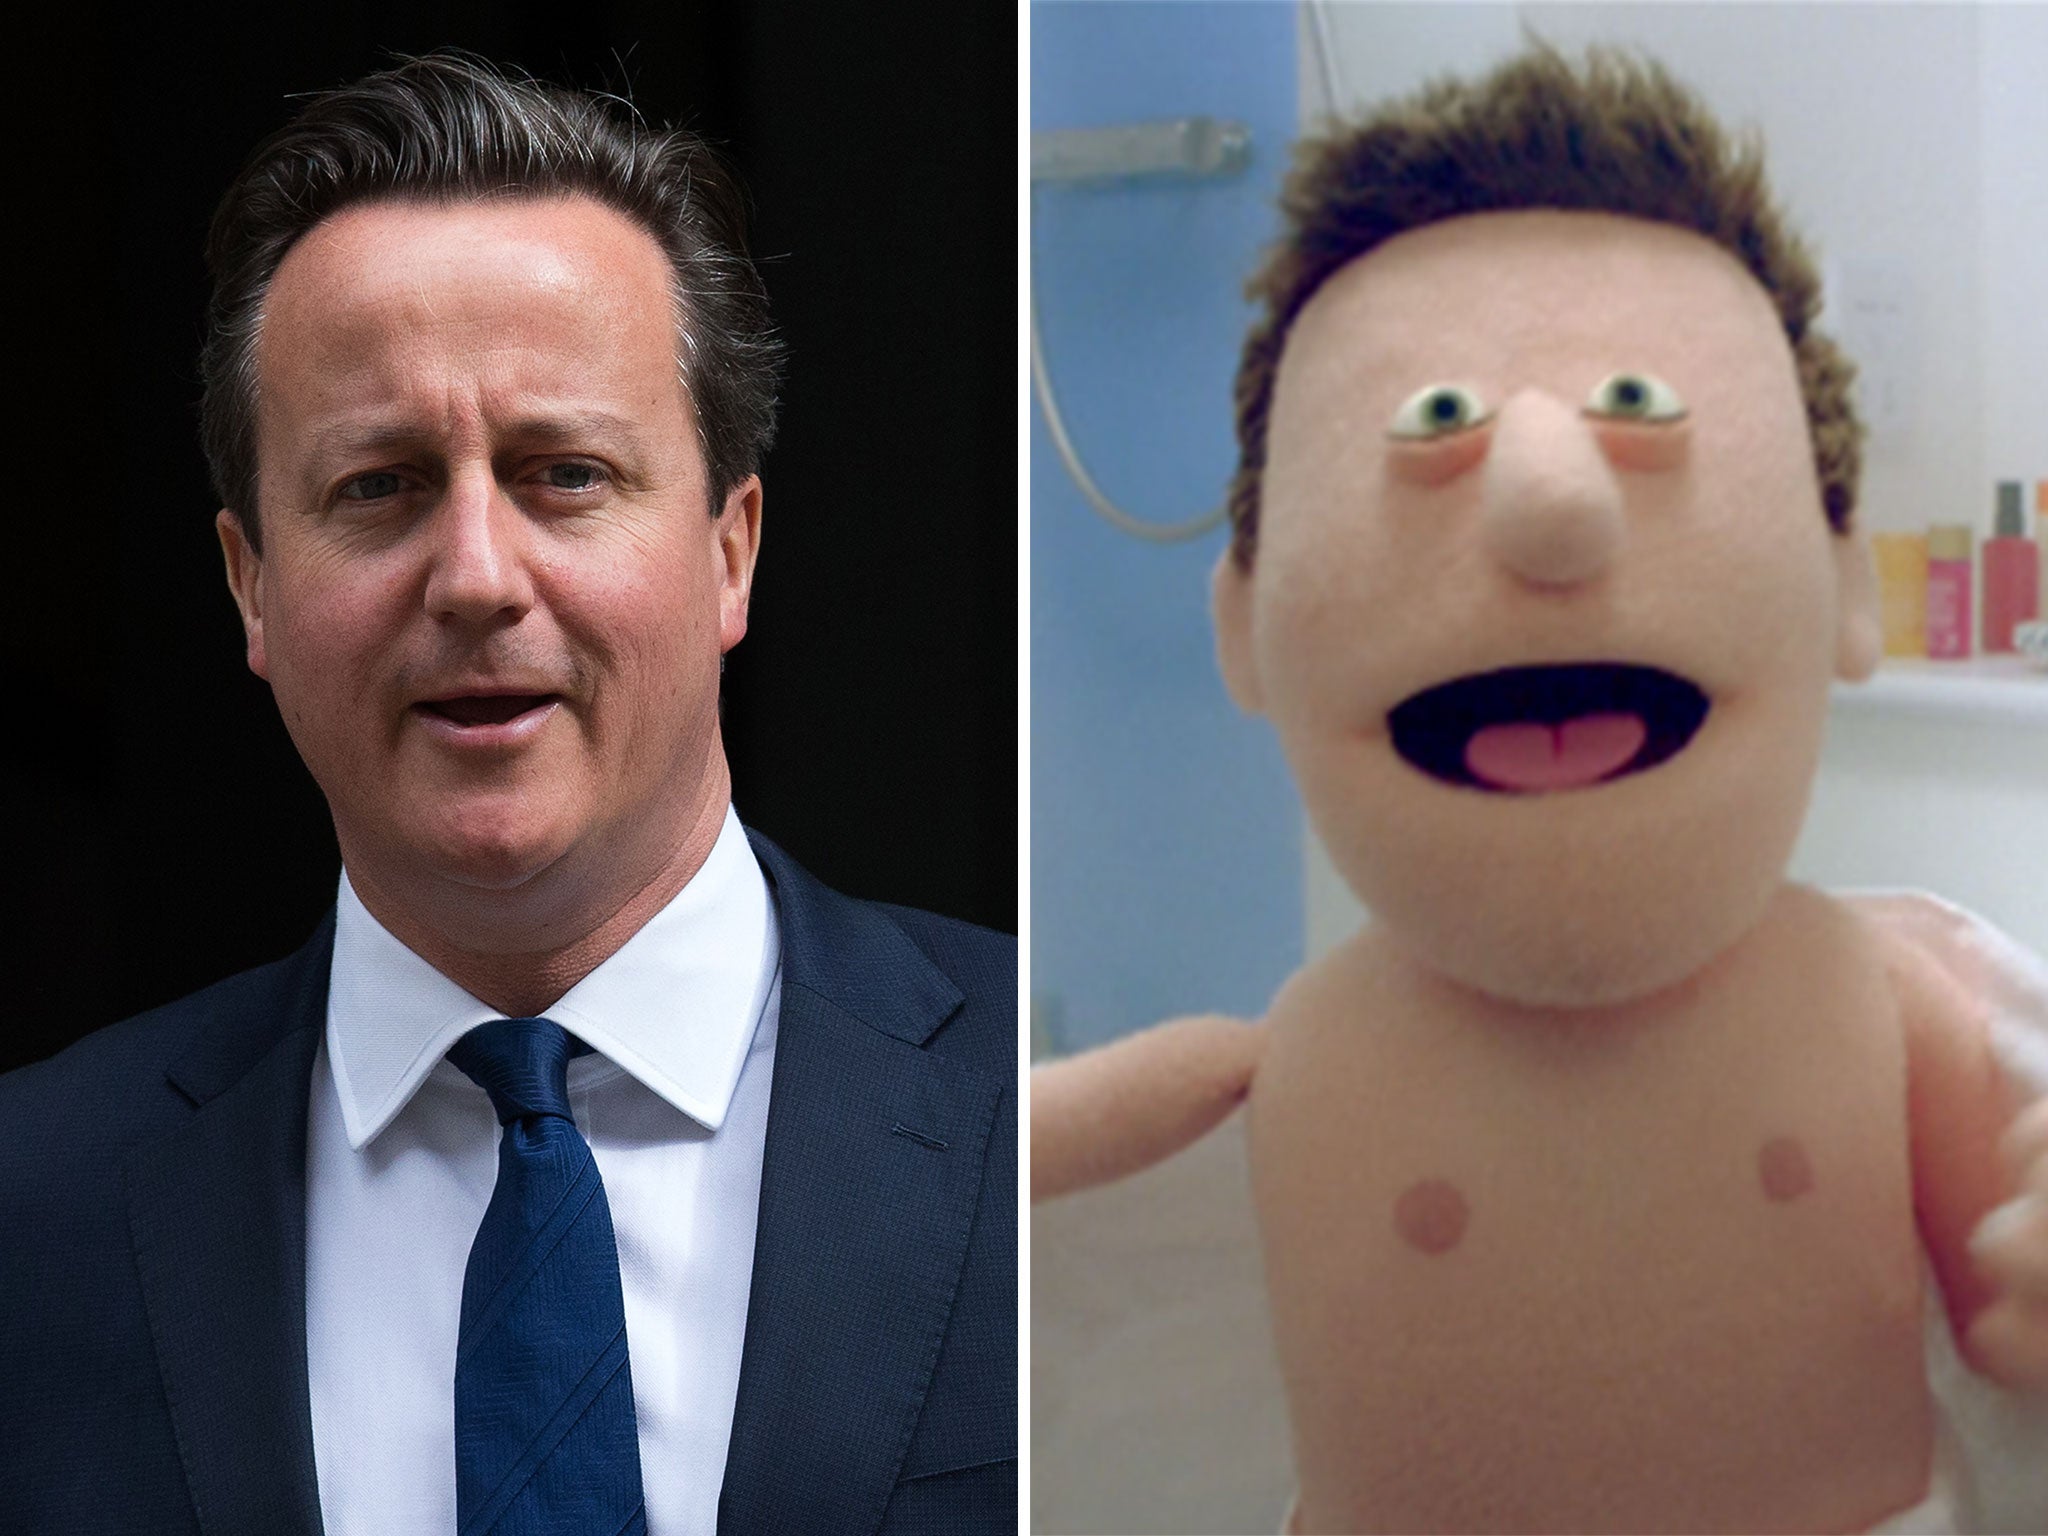 Travelodge has denied Max in its new advert is based on the likeness of David Cameron